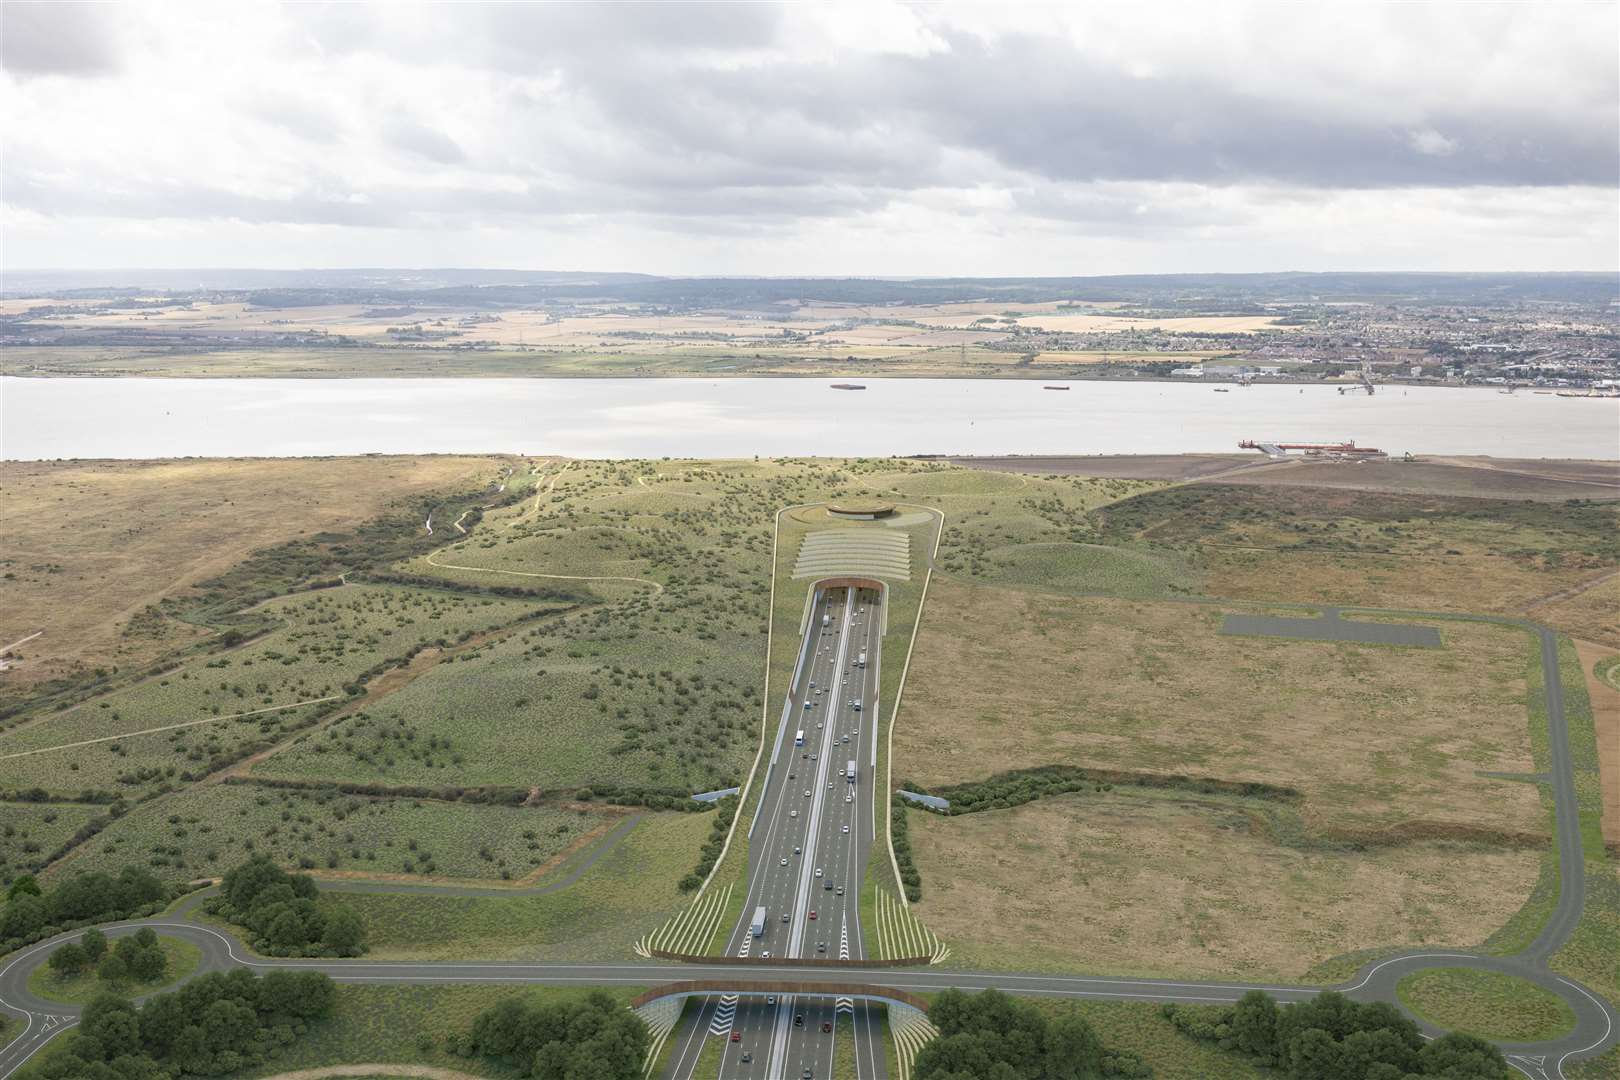 The proposed northern tunnel entrance approach at the Lower Thames Crossing. Picture: Joas Souza Photographer